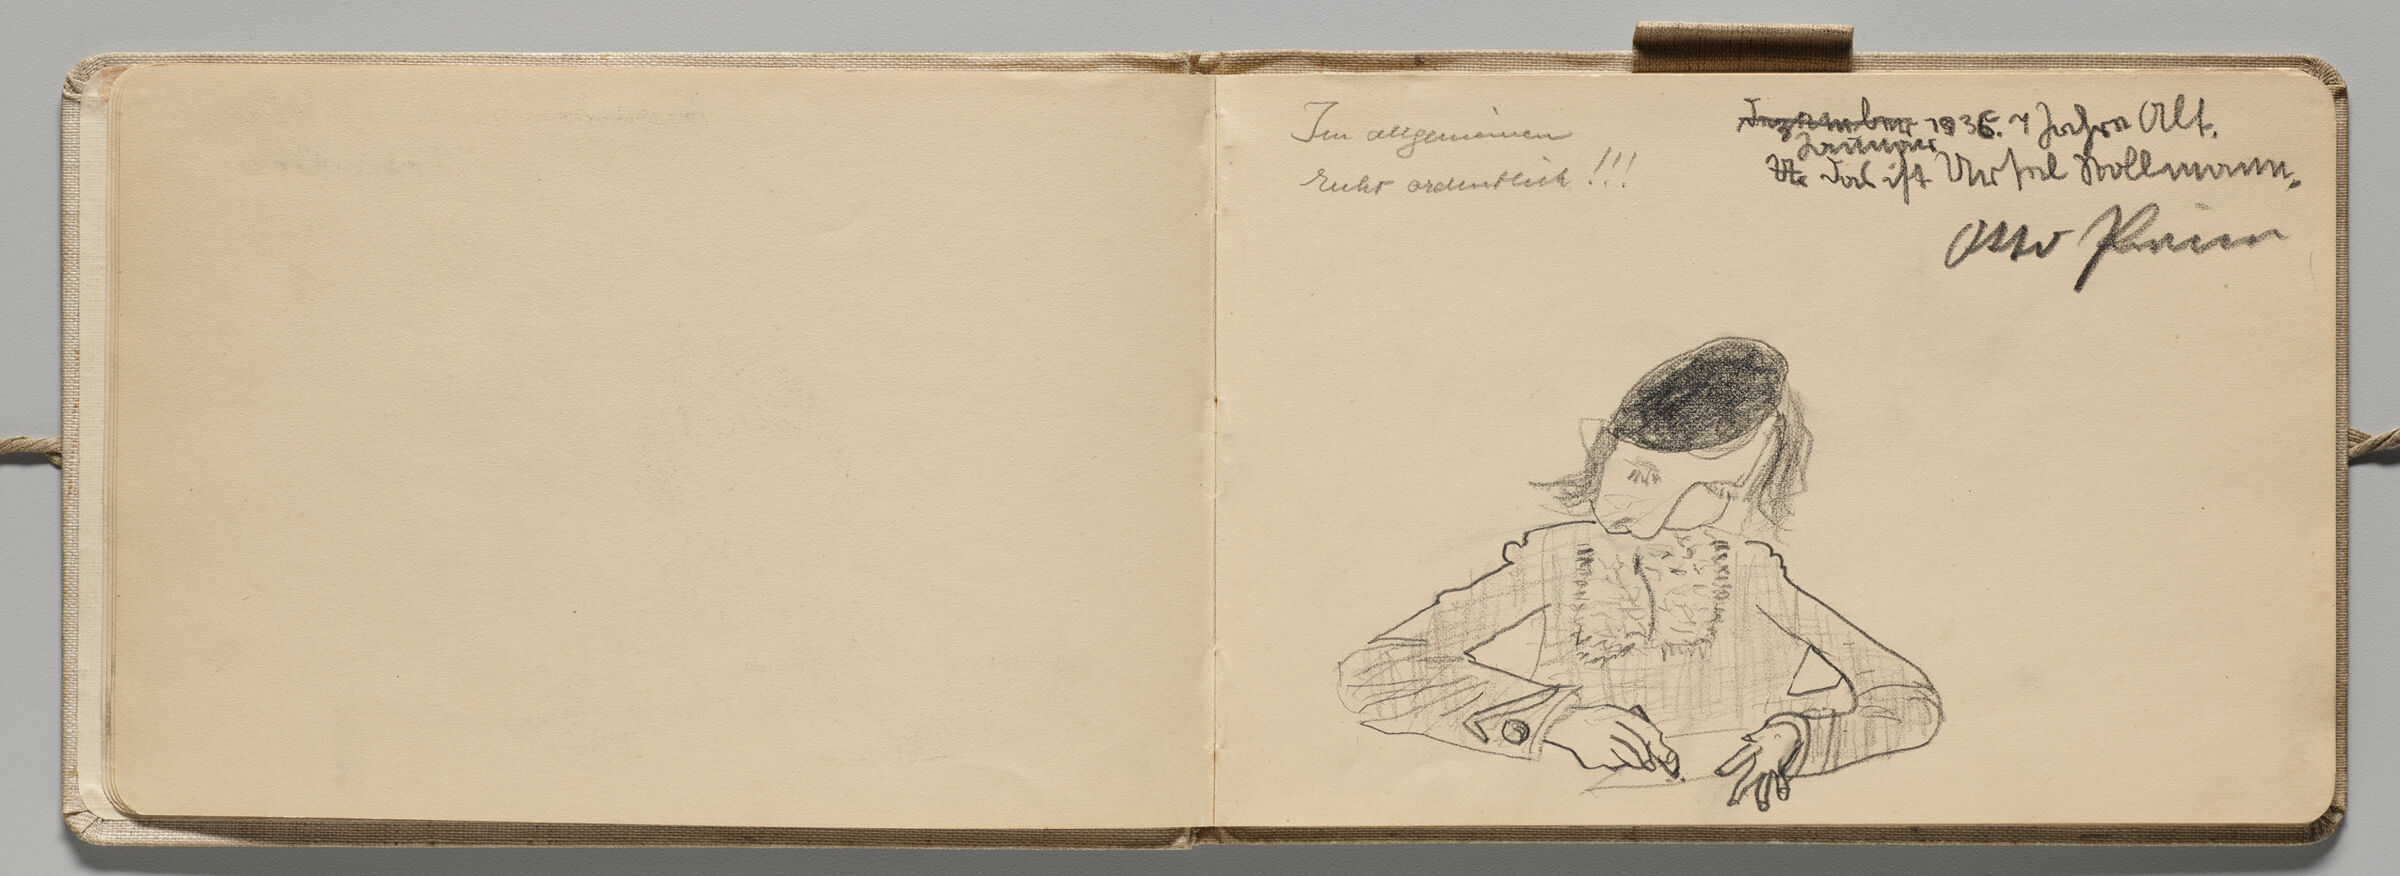 Untitled (Blank, Left Page); Untitled (Portrait Of Figure Writing Or Drawing, Right Page)